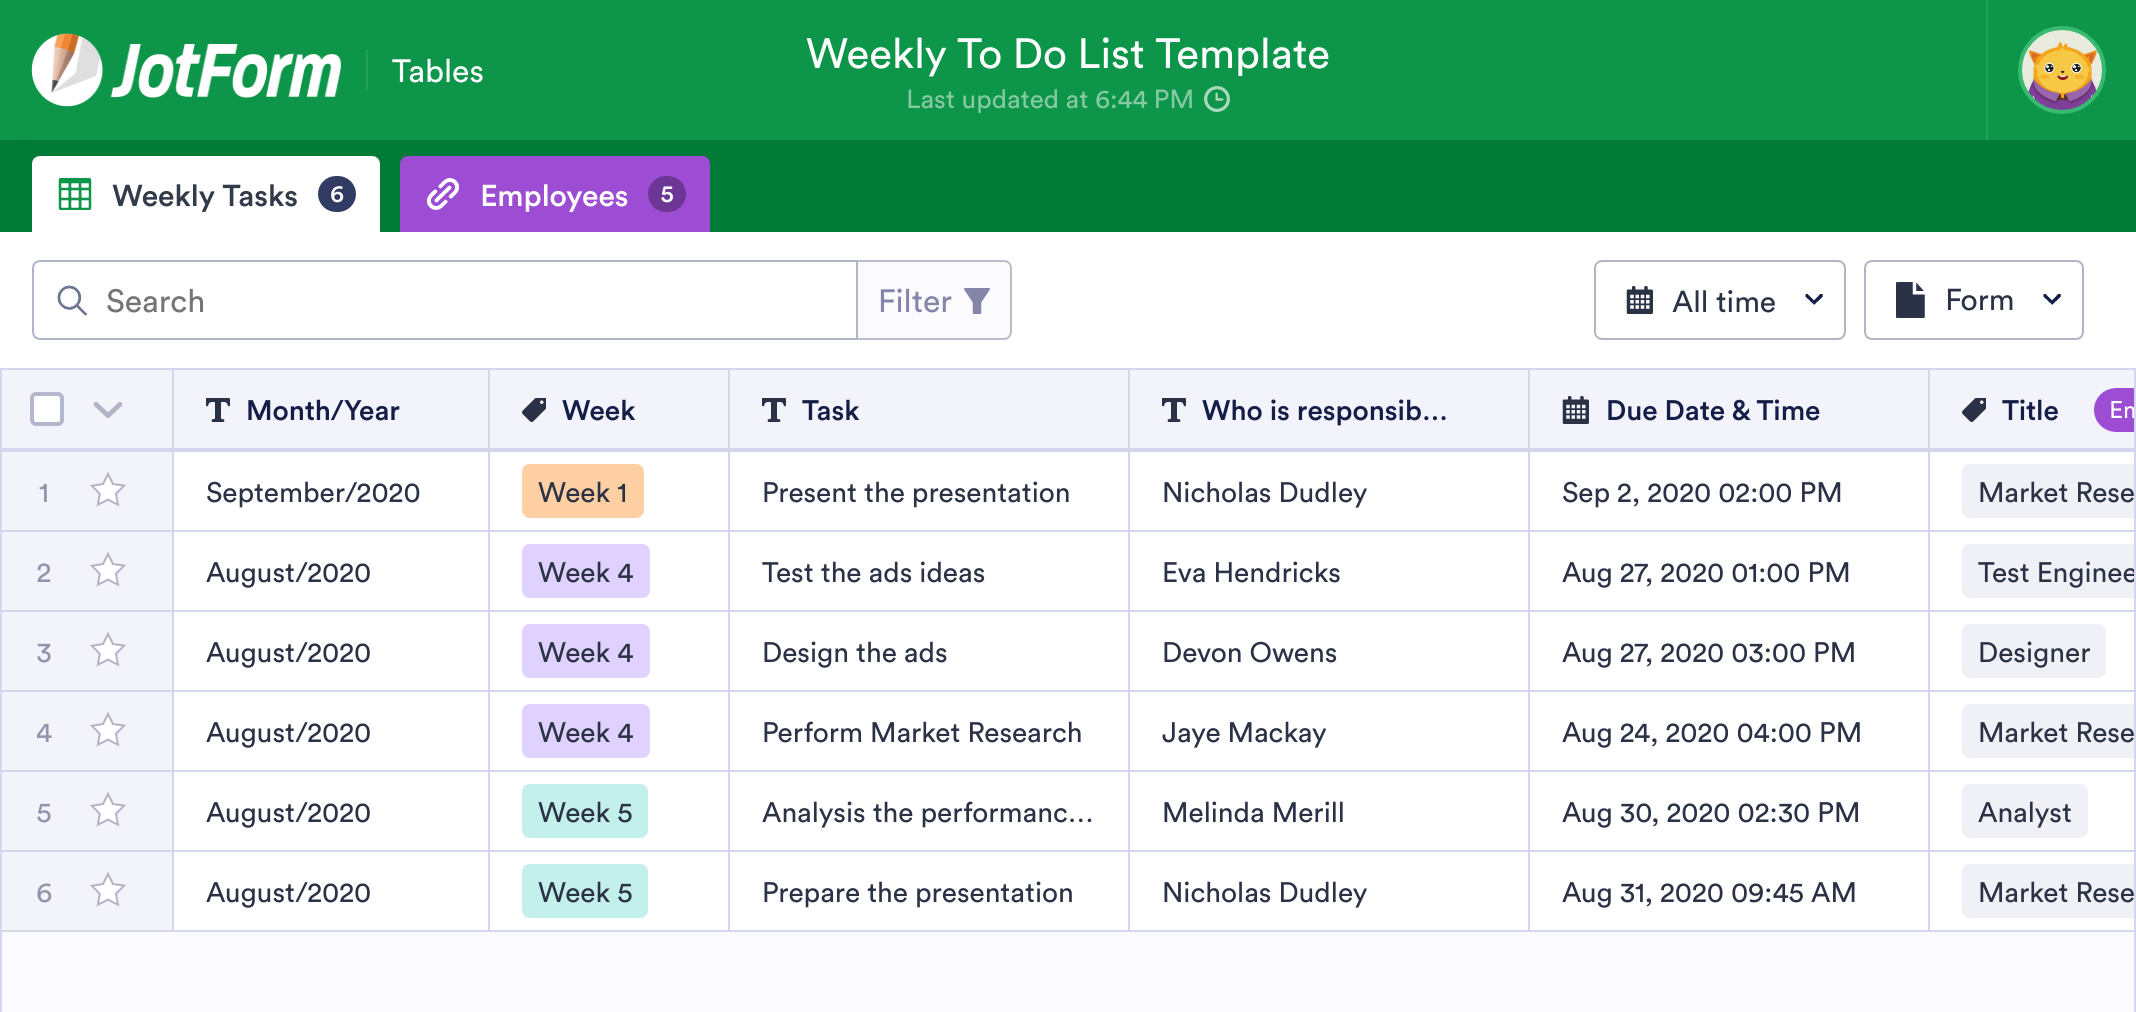 weekly-to-do-list-template-jotform-tables